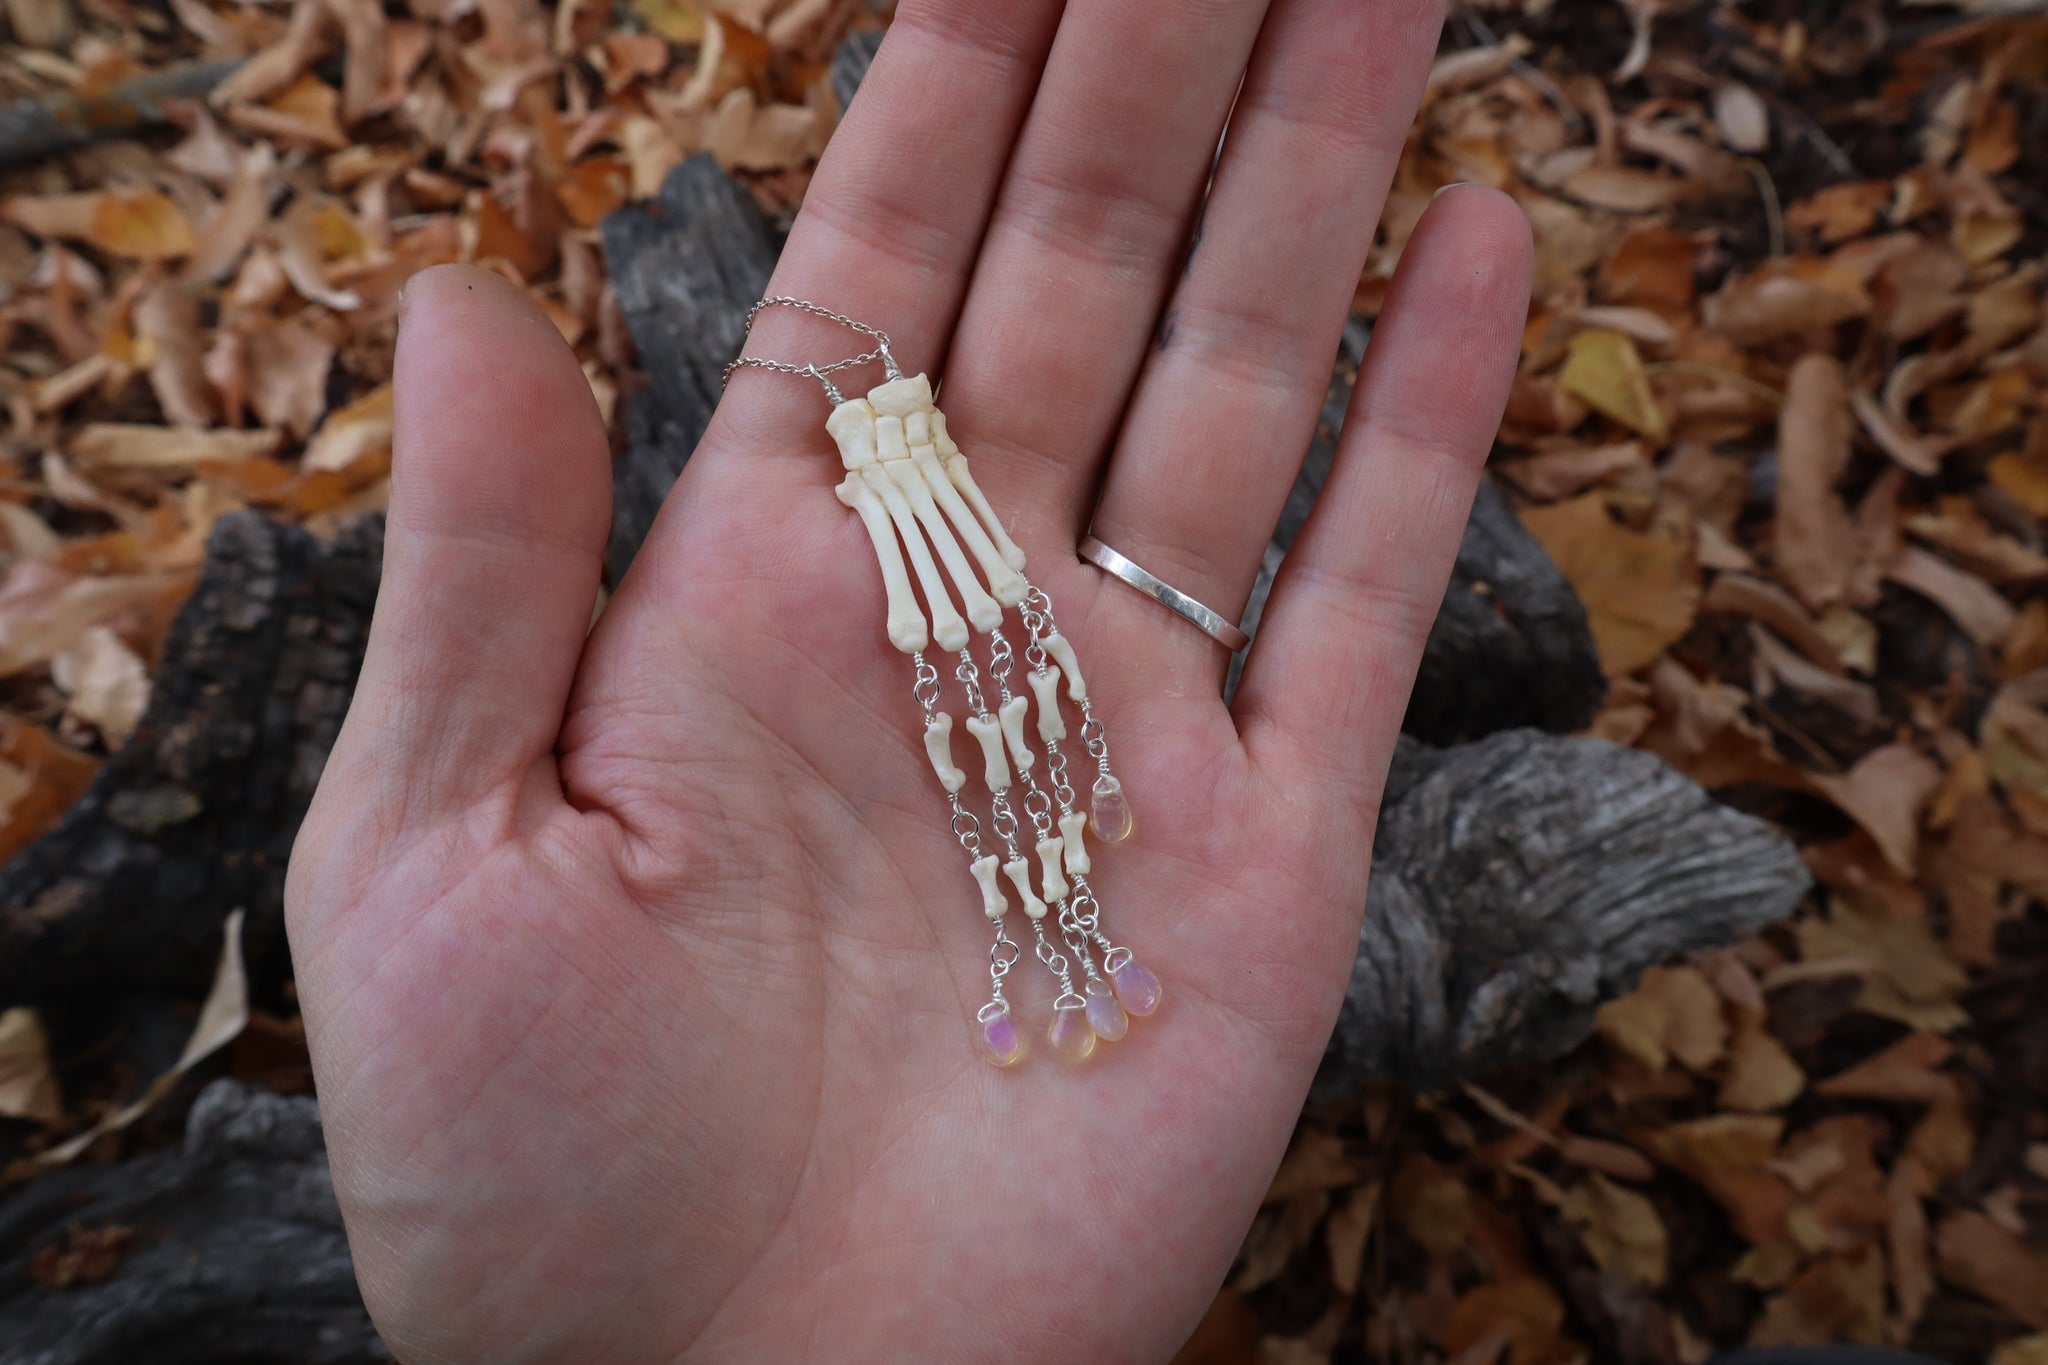 Fluid Striped Skunk Paw Articulation Necklace with Opal “Claws”